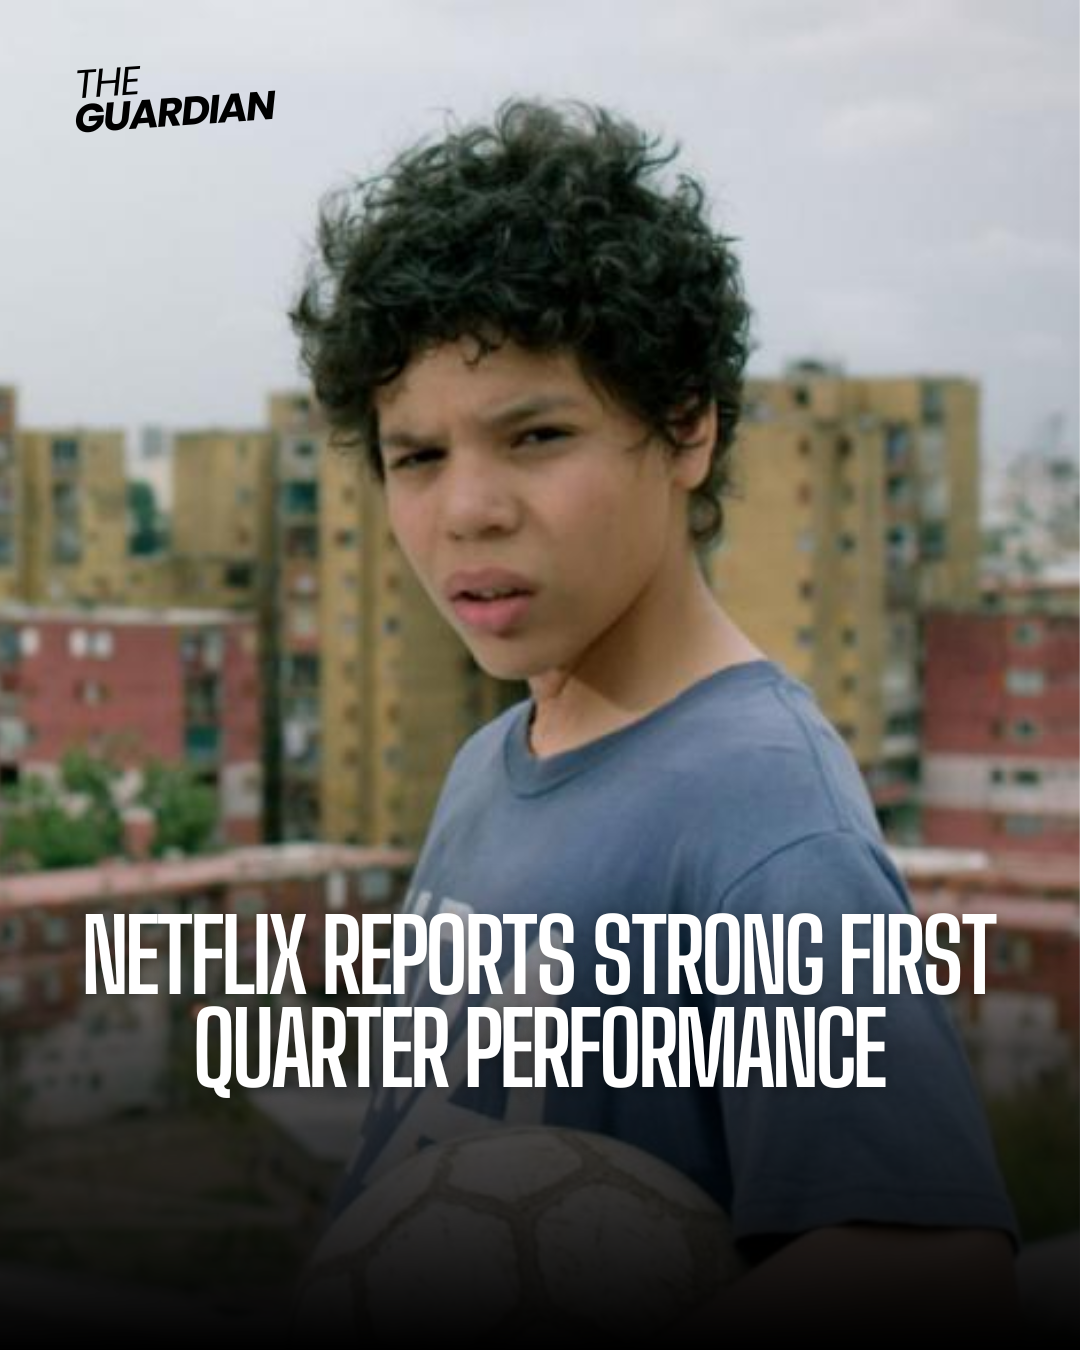 Netflix says its earnings have skyrocketed in the first three months of this year, somewhat thanks to a crackdown on password sharing.